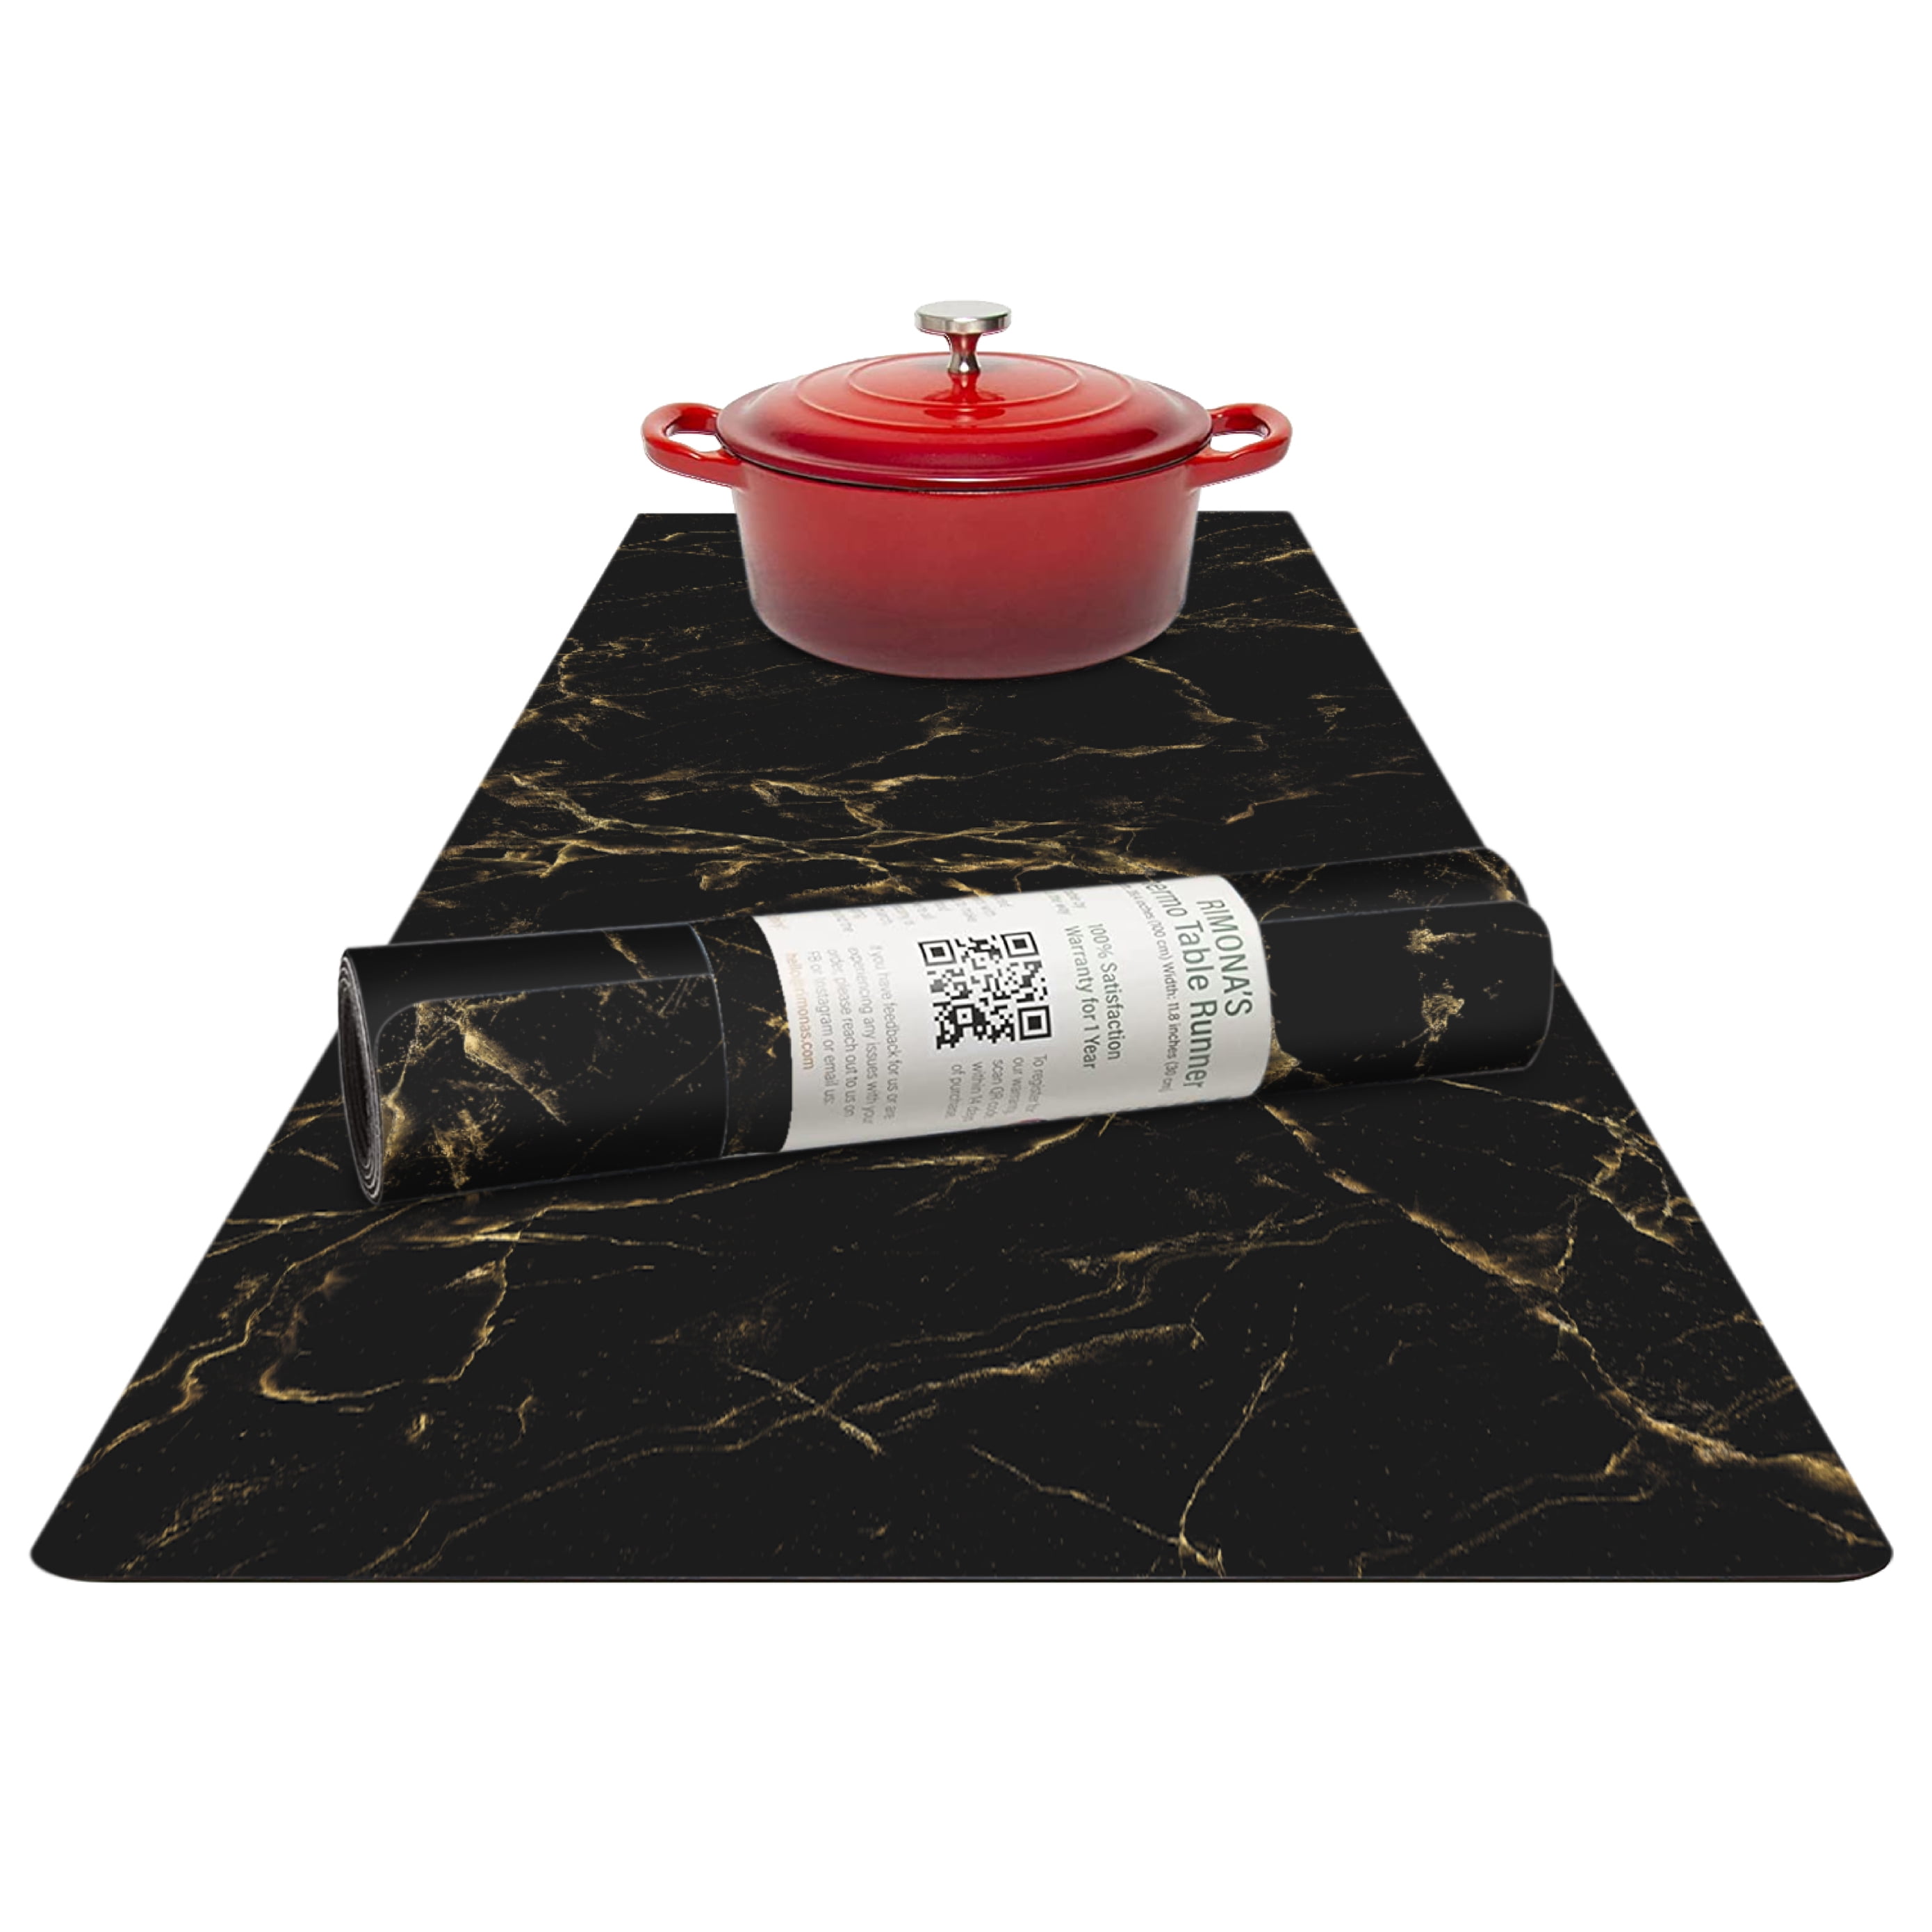 Trivet Table Runner Hot Plates Mat 12 X 40 Inch Heat Resistant Table  Protector W 313037434404